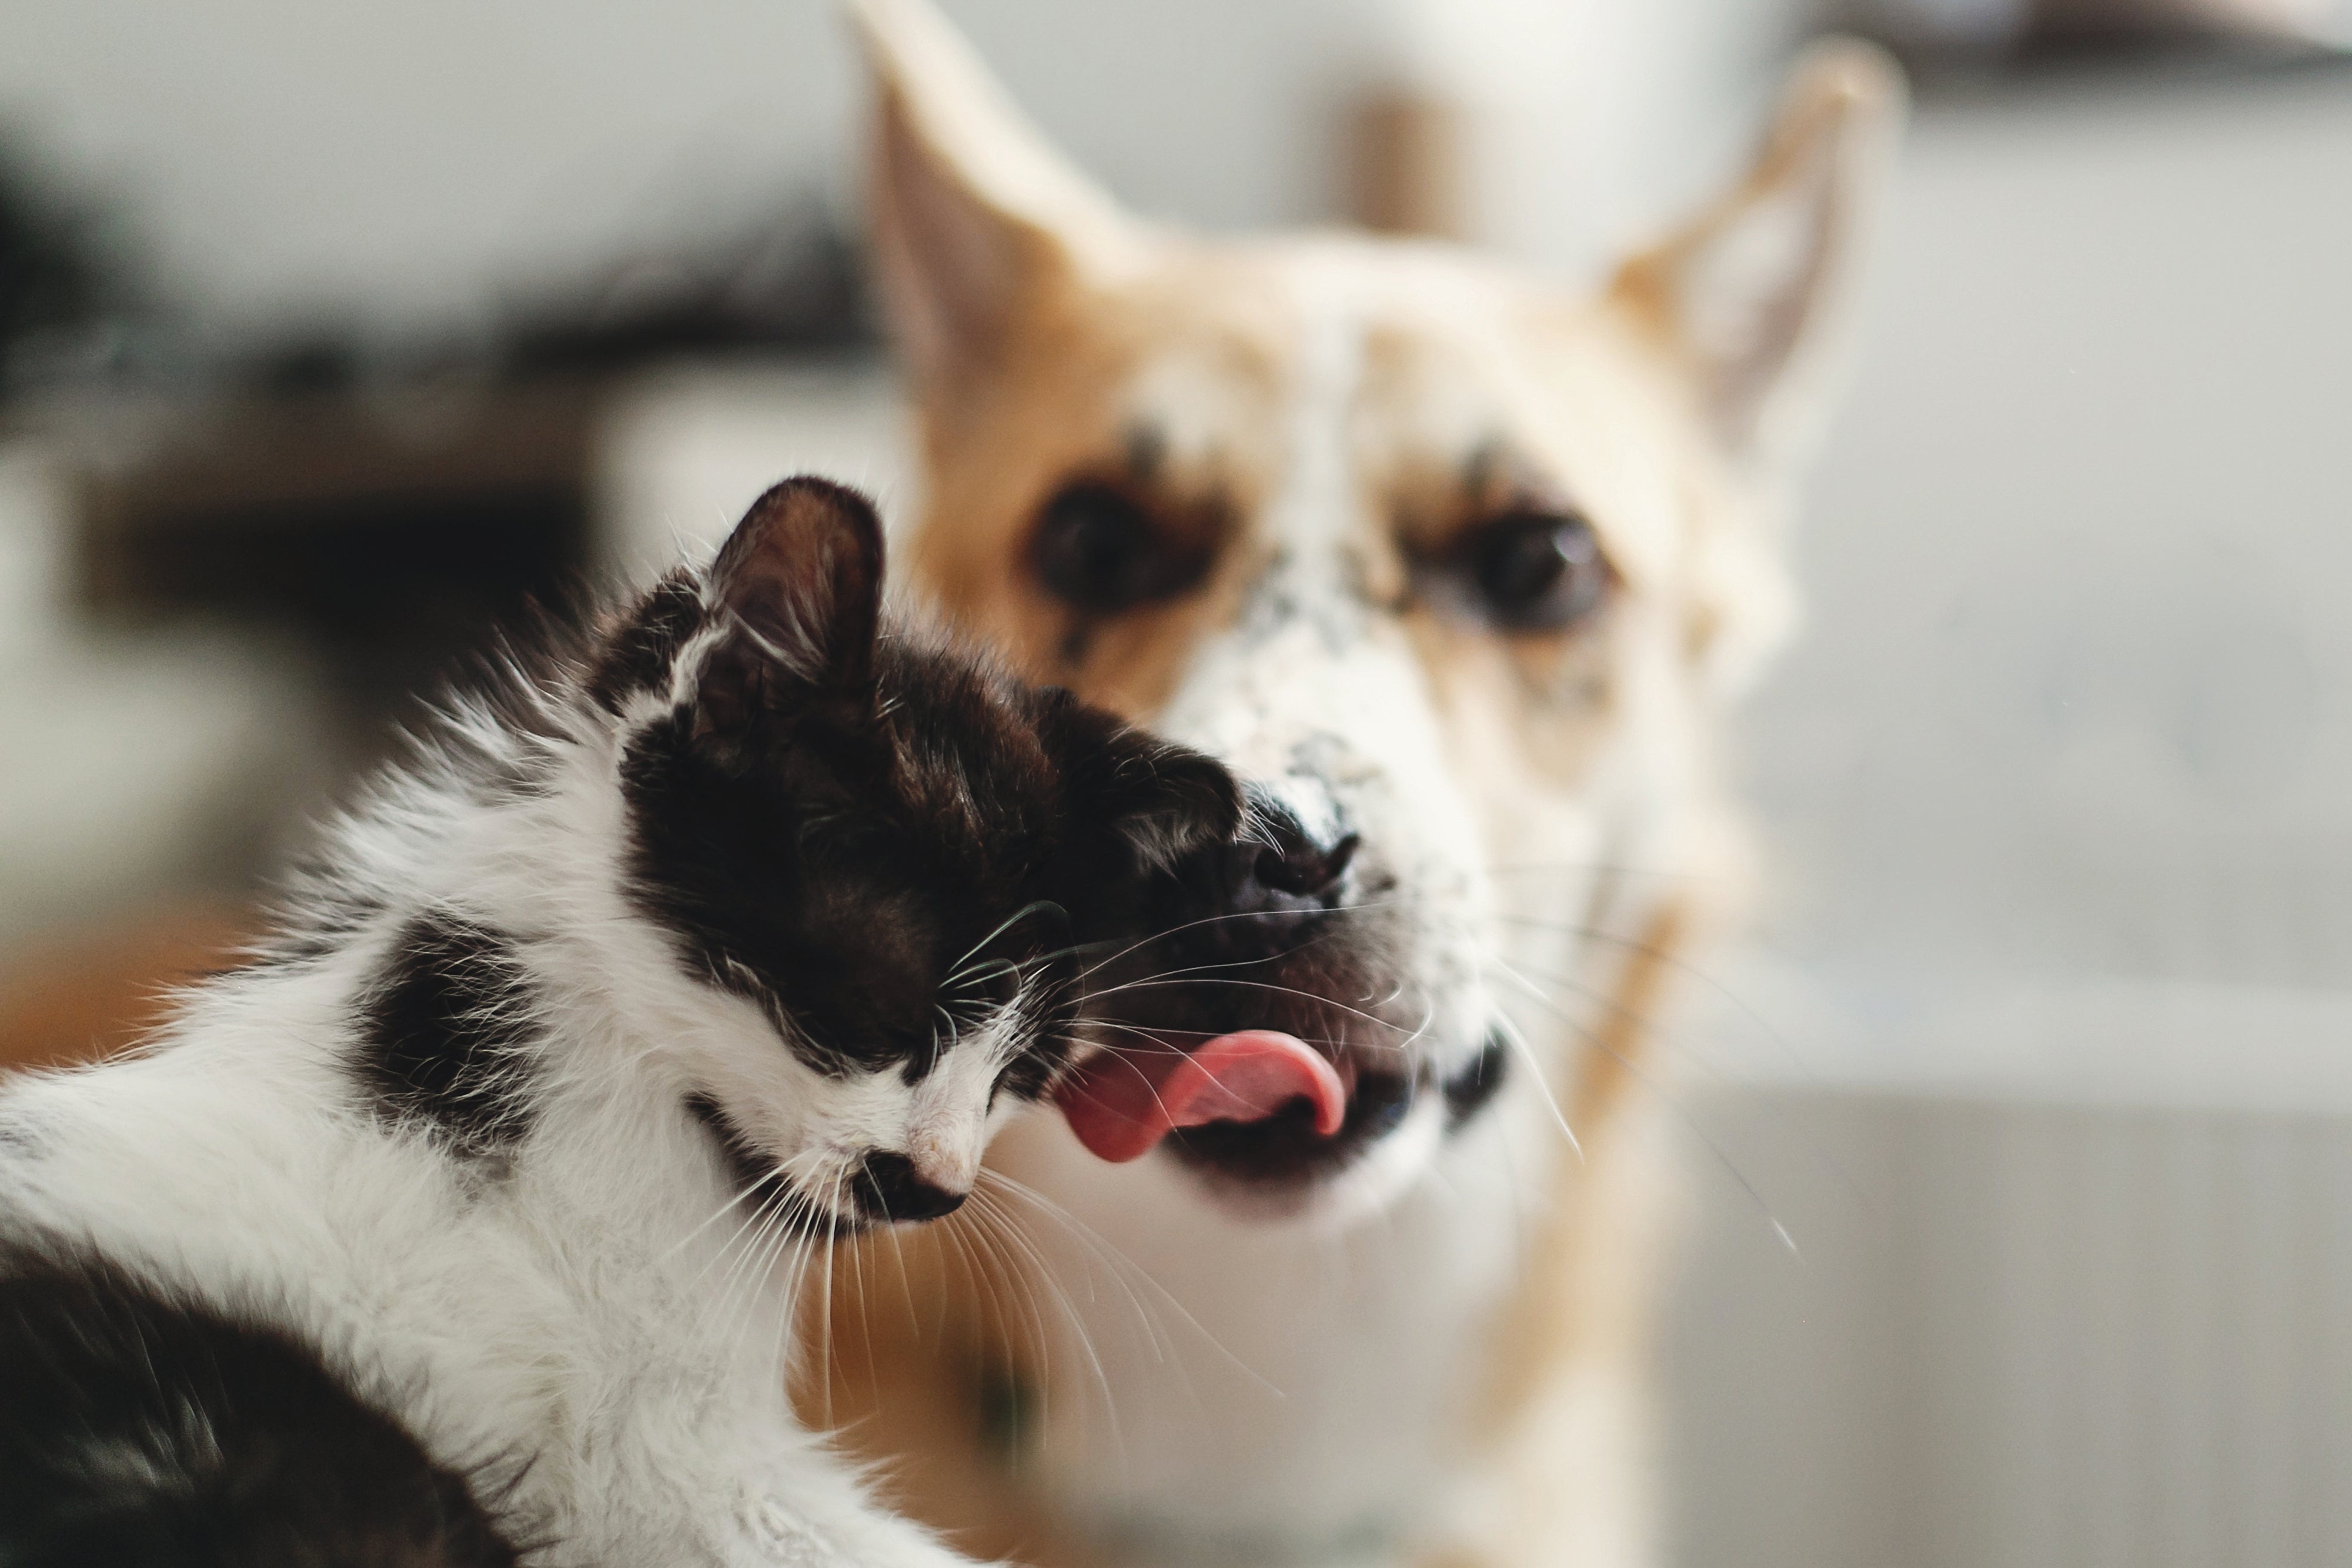 Dog and cat licking eachother